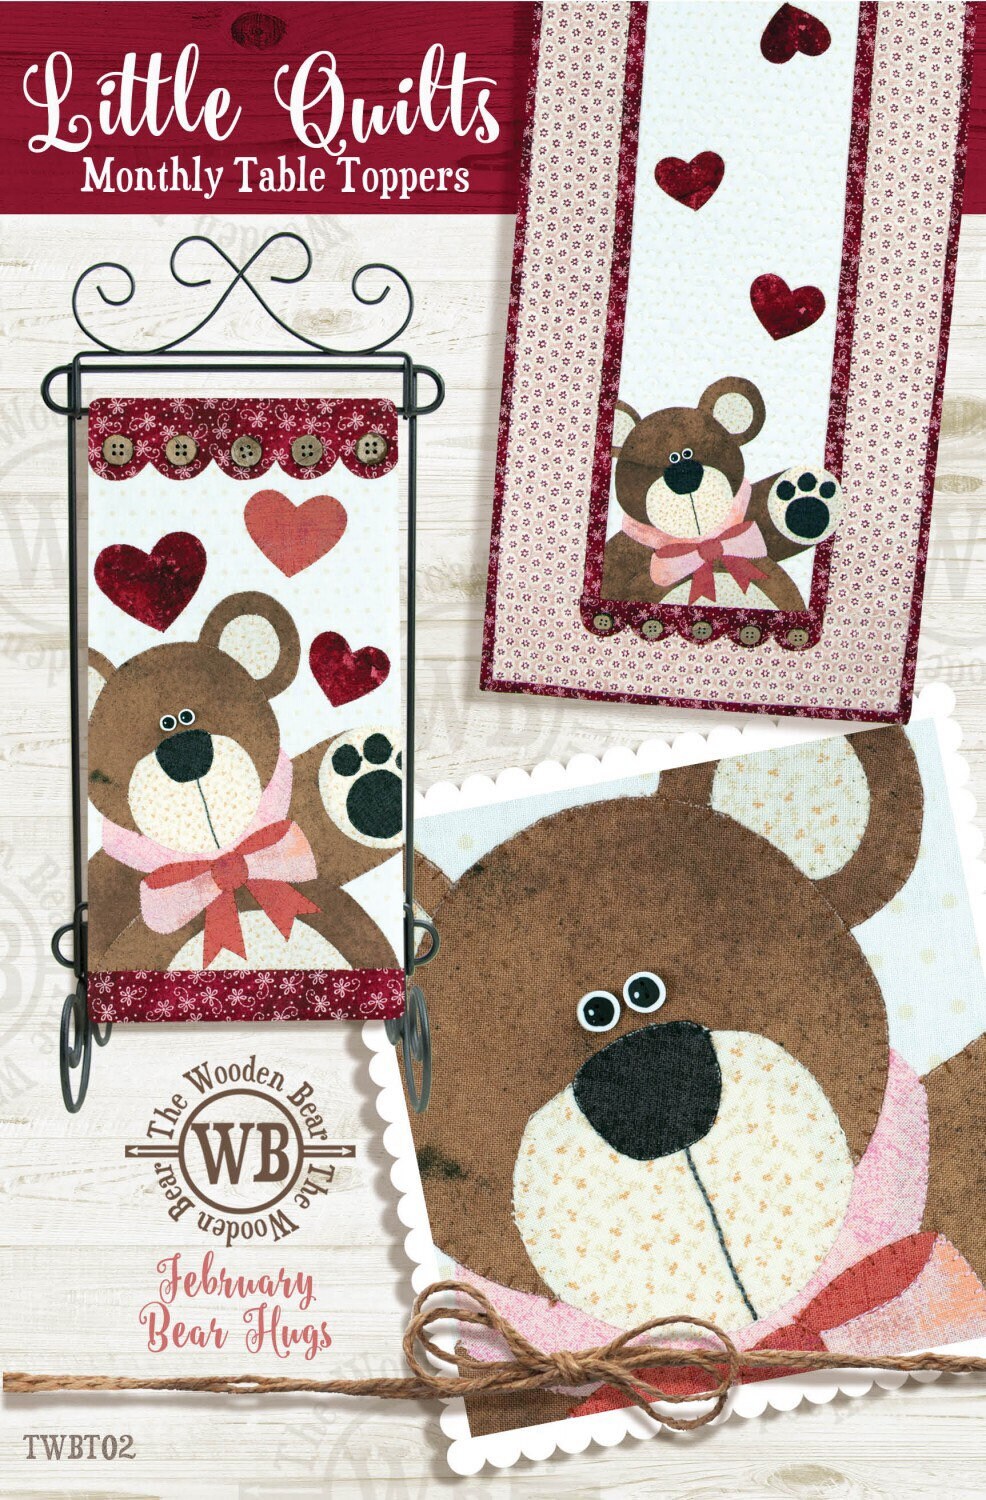 The Wooden Bear February Bear Hugs Mini Quilt Pattern - Little Quilts Series - Buttons Included